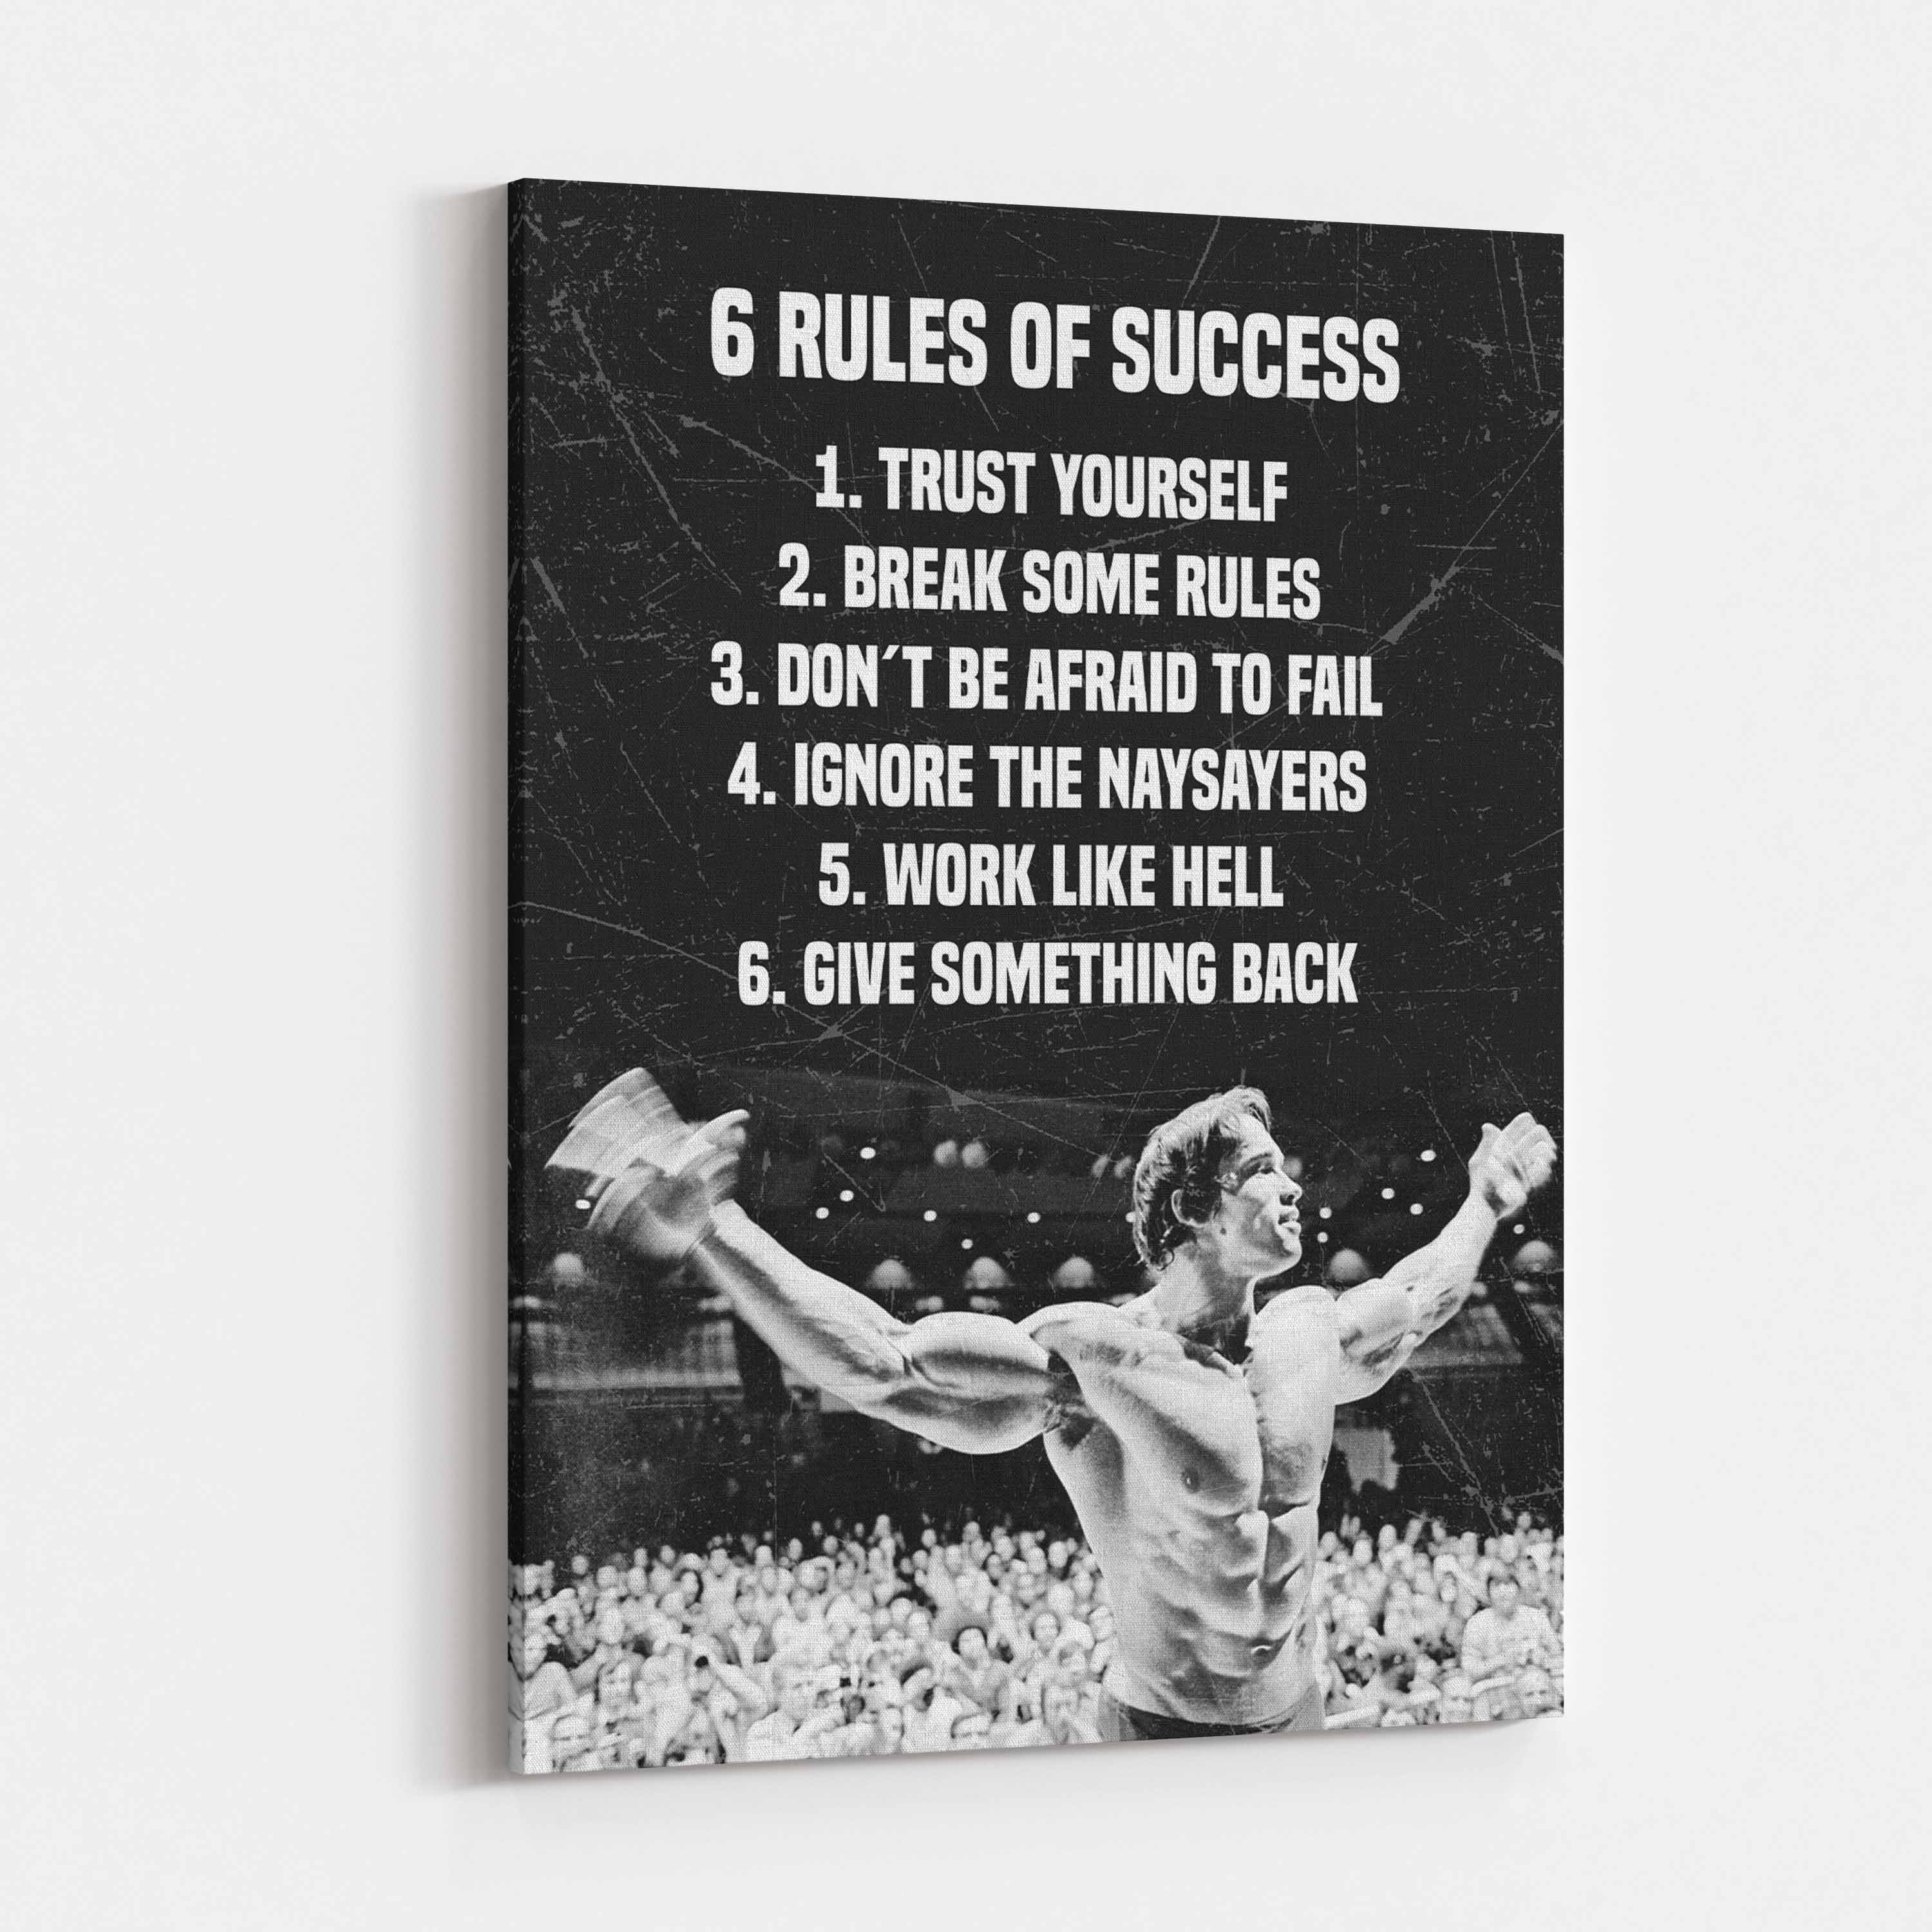 RULES OF SUCCES